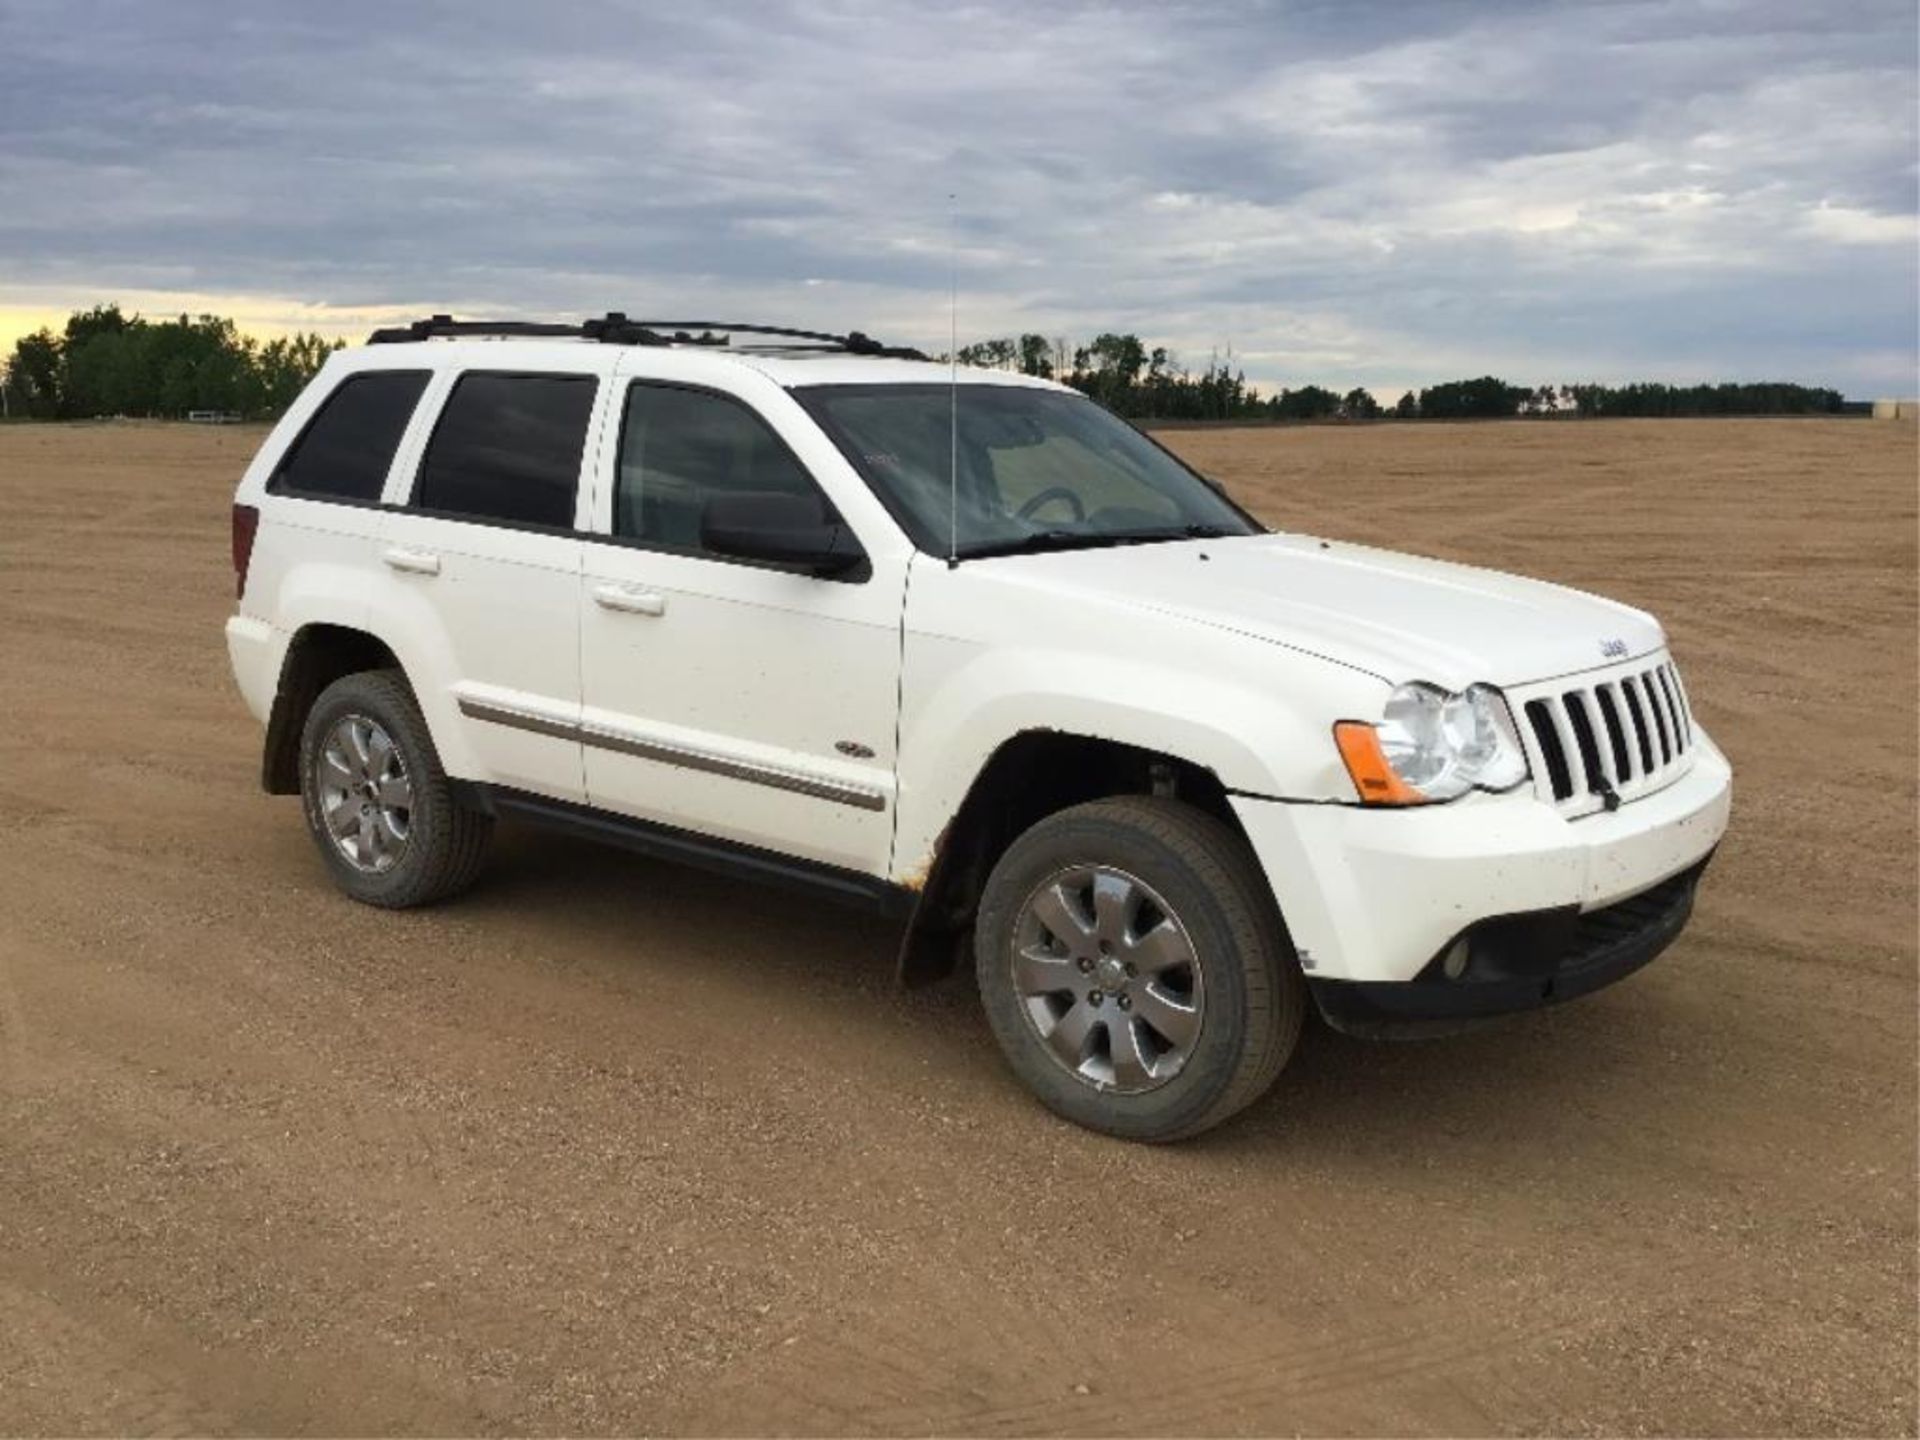 2008 Jeep Grand Cherokee 4x4 SUV VIN 1J8HR48M98C524581 North Edition, 3.0L Diesel Eng, 316,502km, - Image 2 of 14